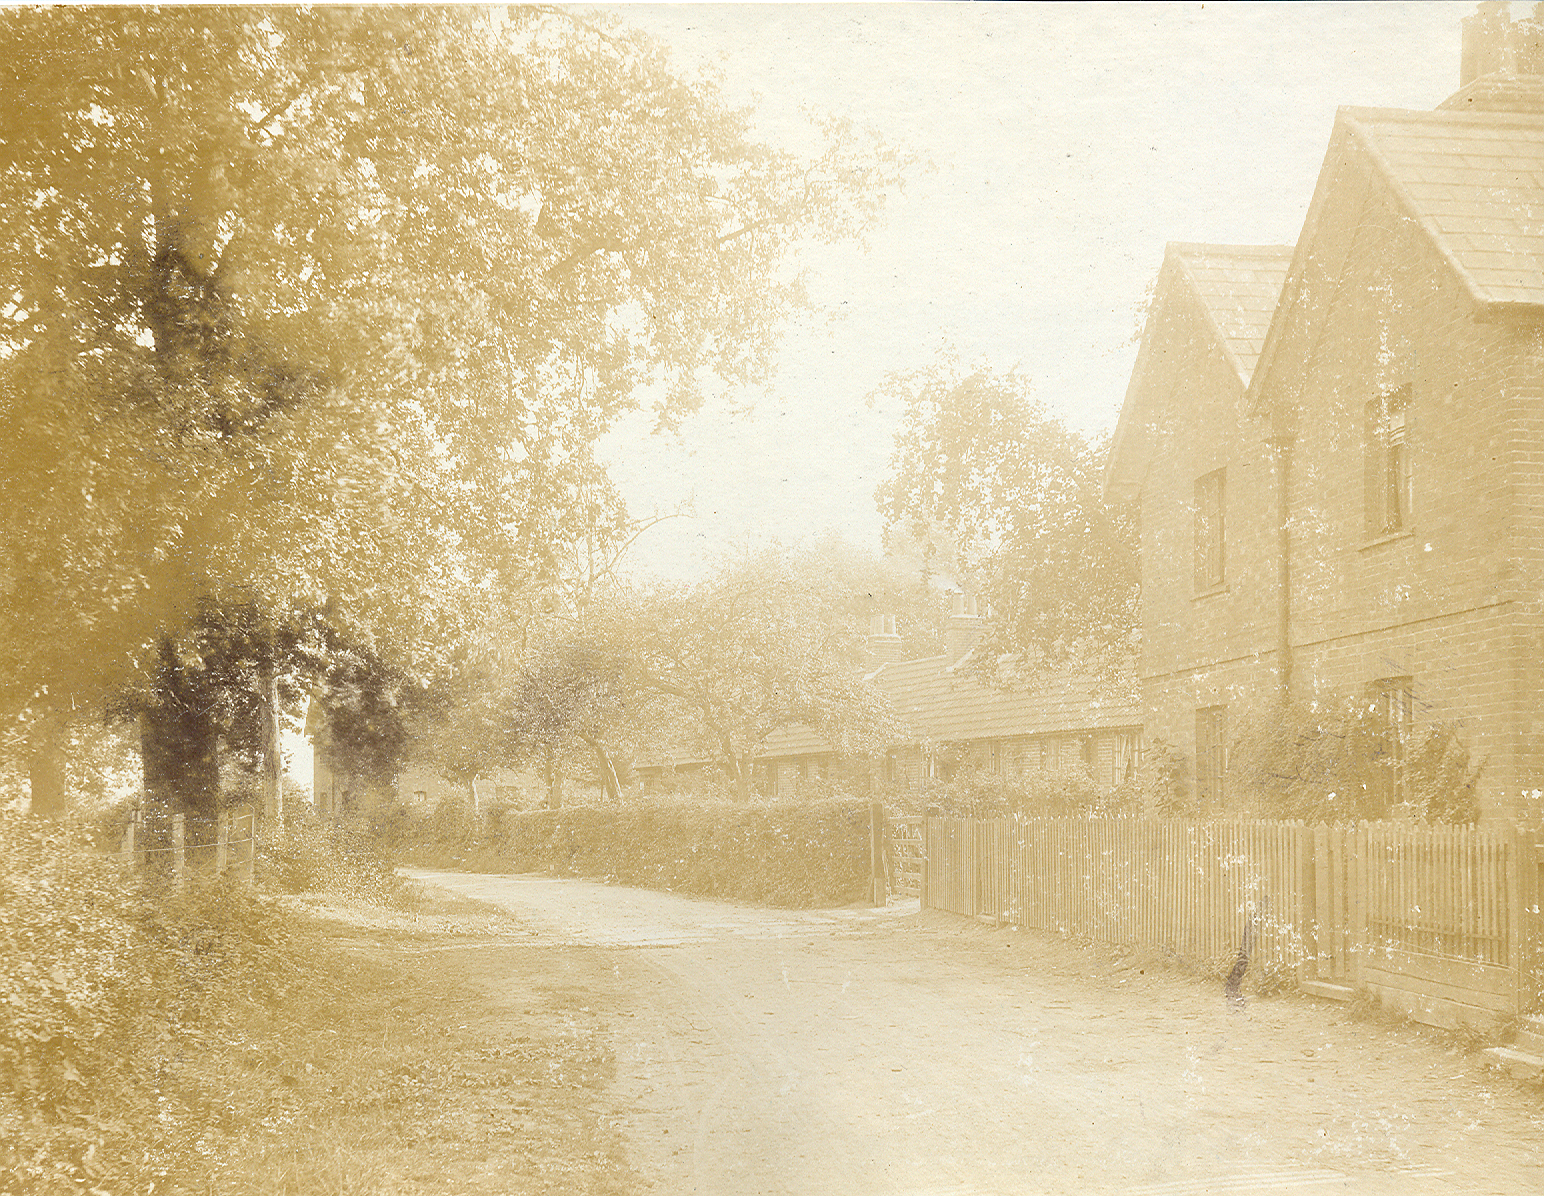 Houses within the rows of Sandpit Cottages, Hatfield Hyde | Welwyn Garden City Library